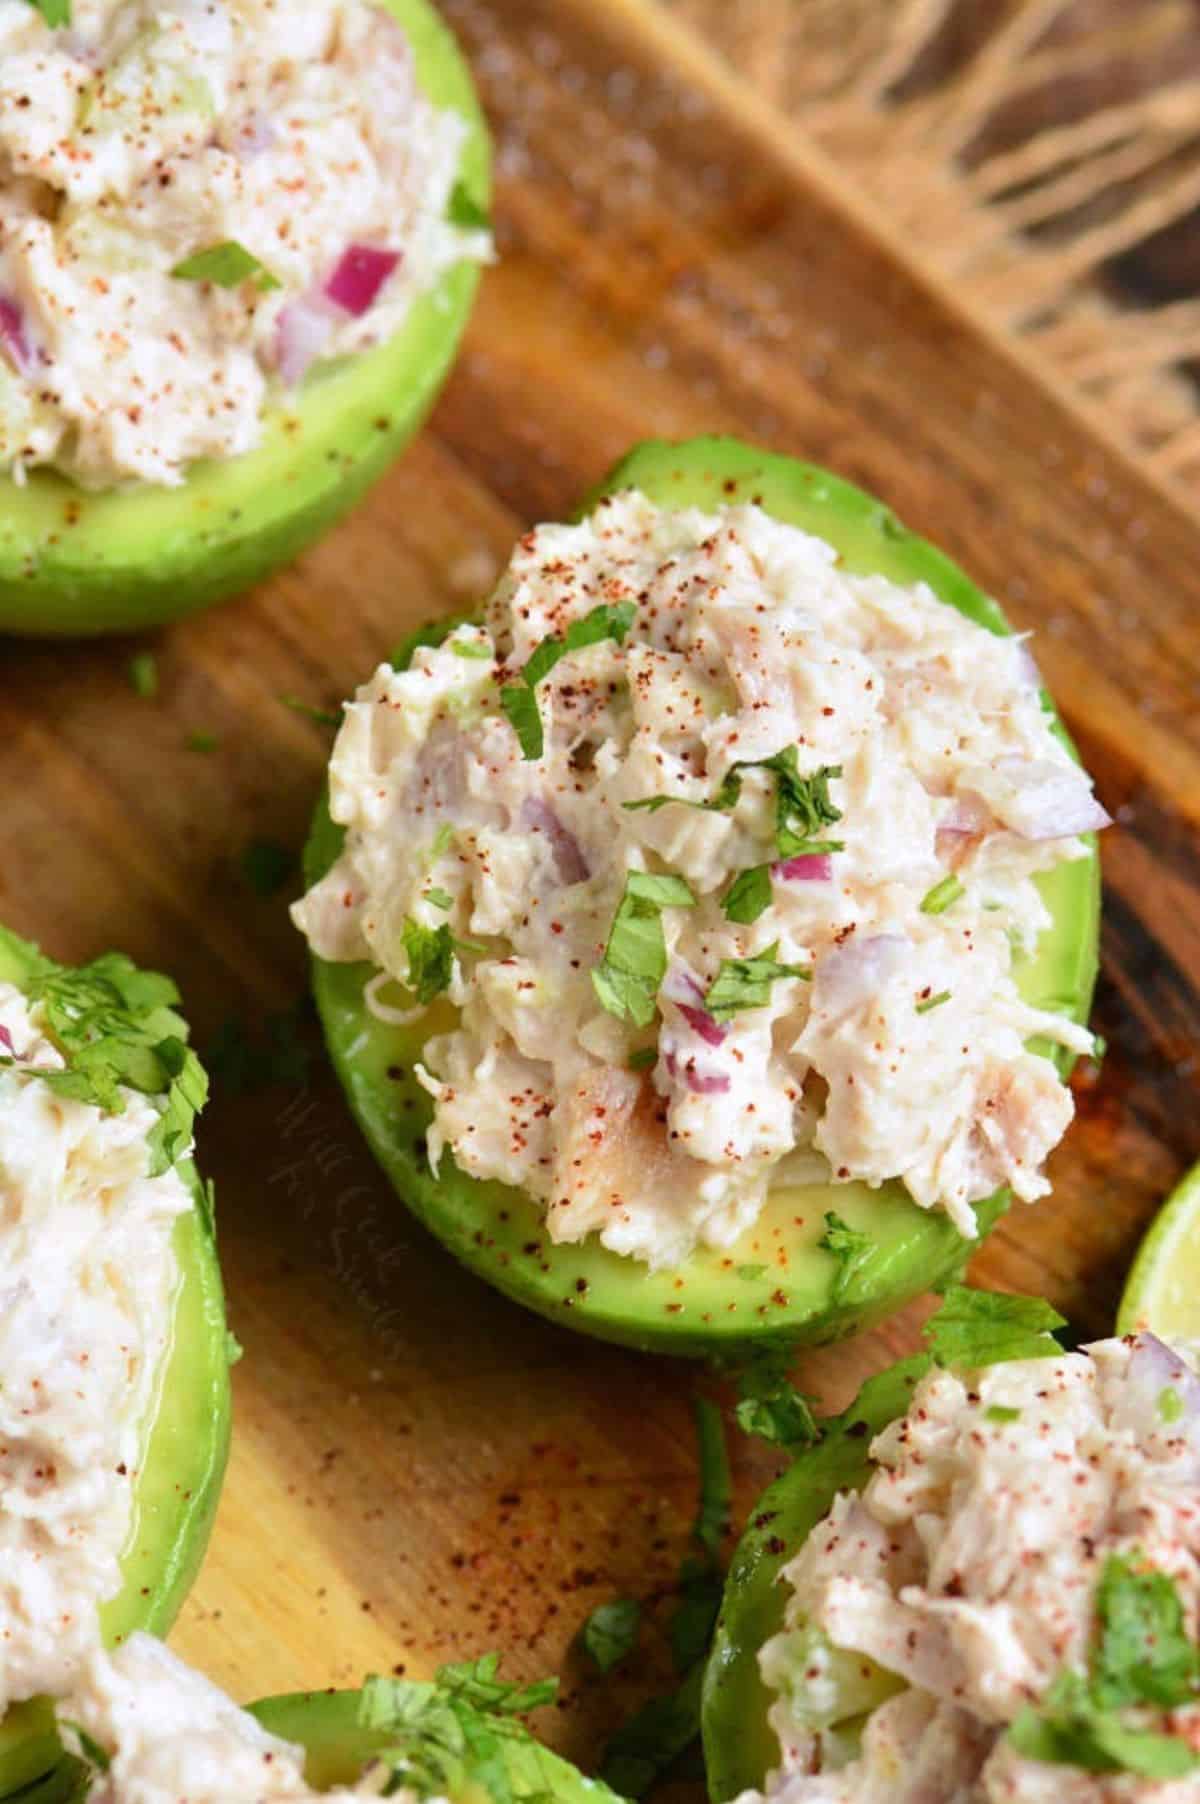 avocado half stuffed with chicken salad and some more surrounding it.